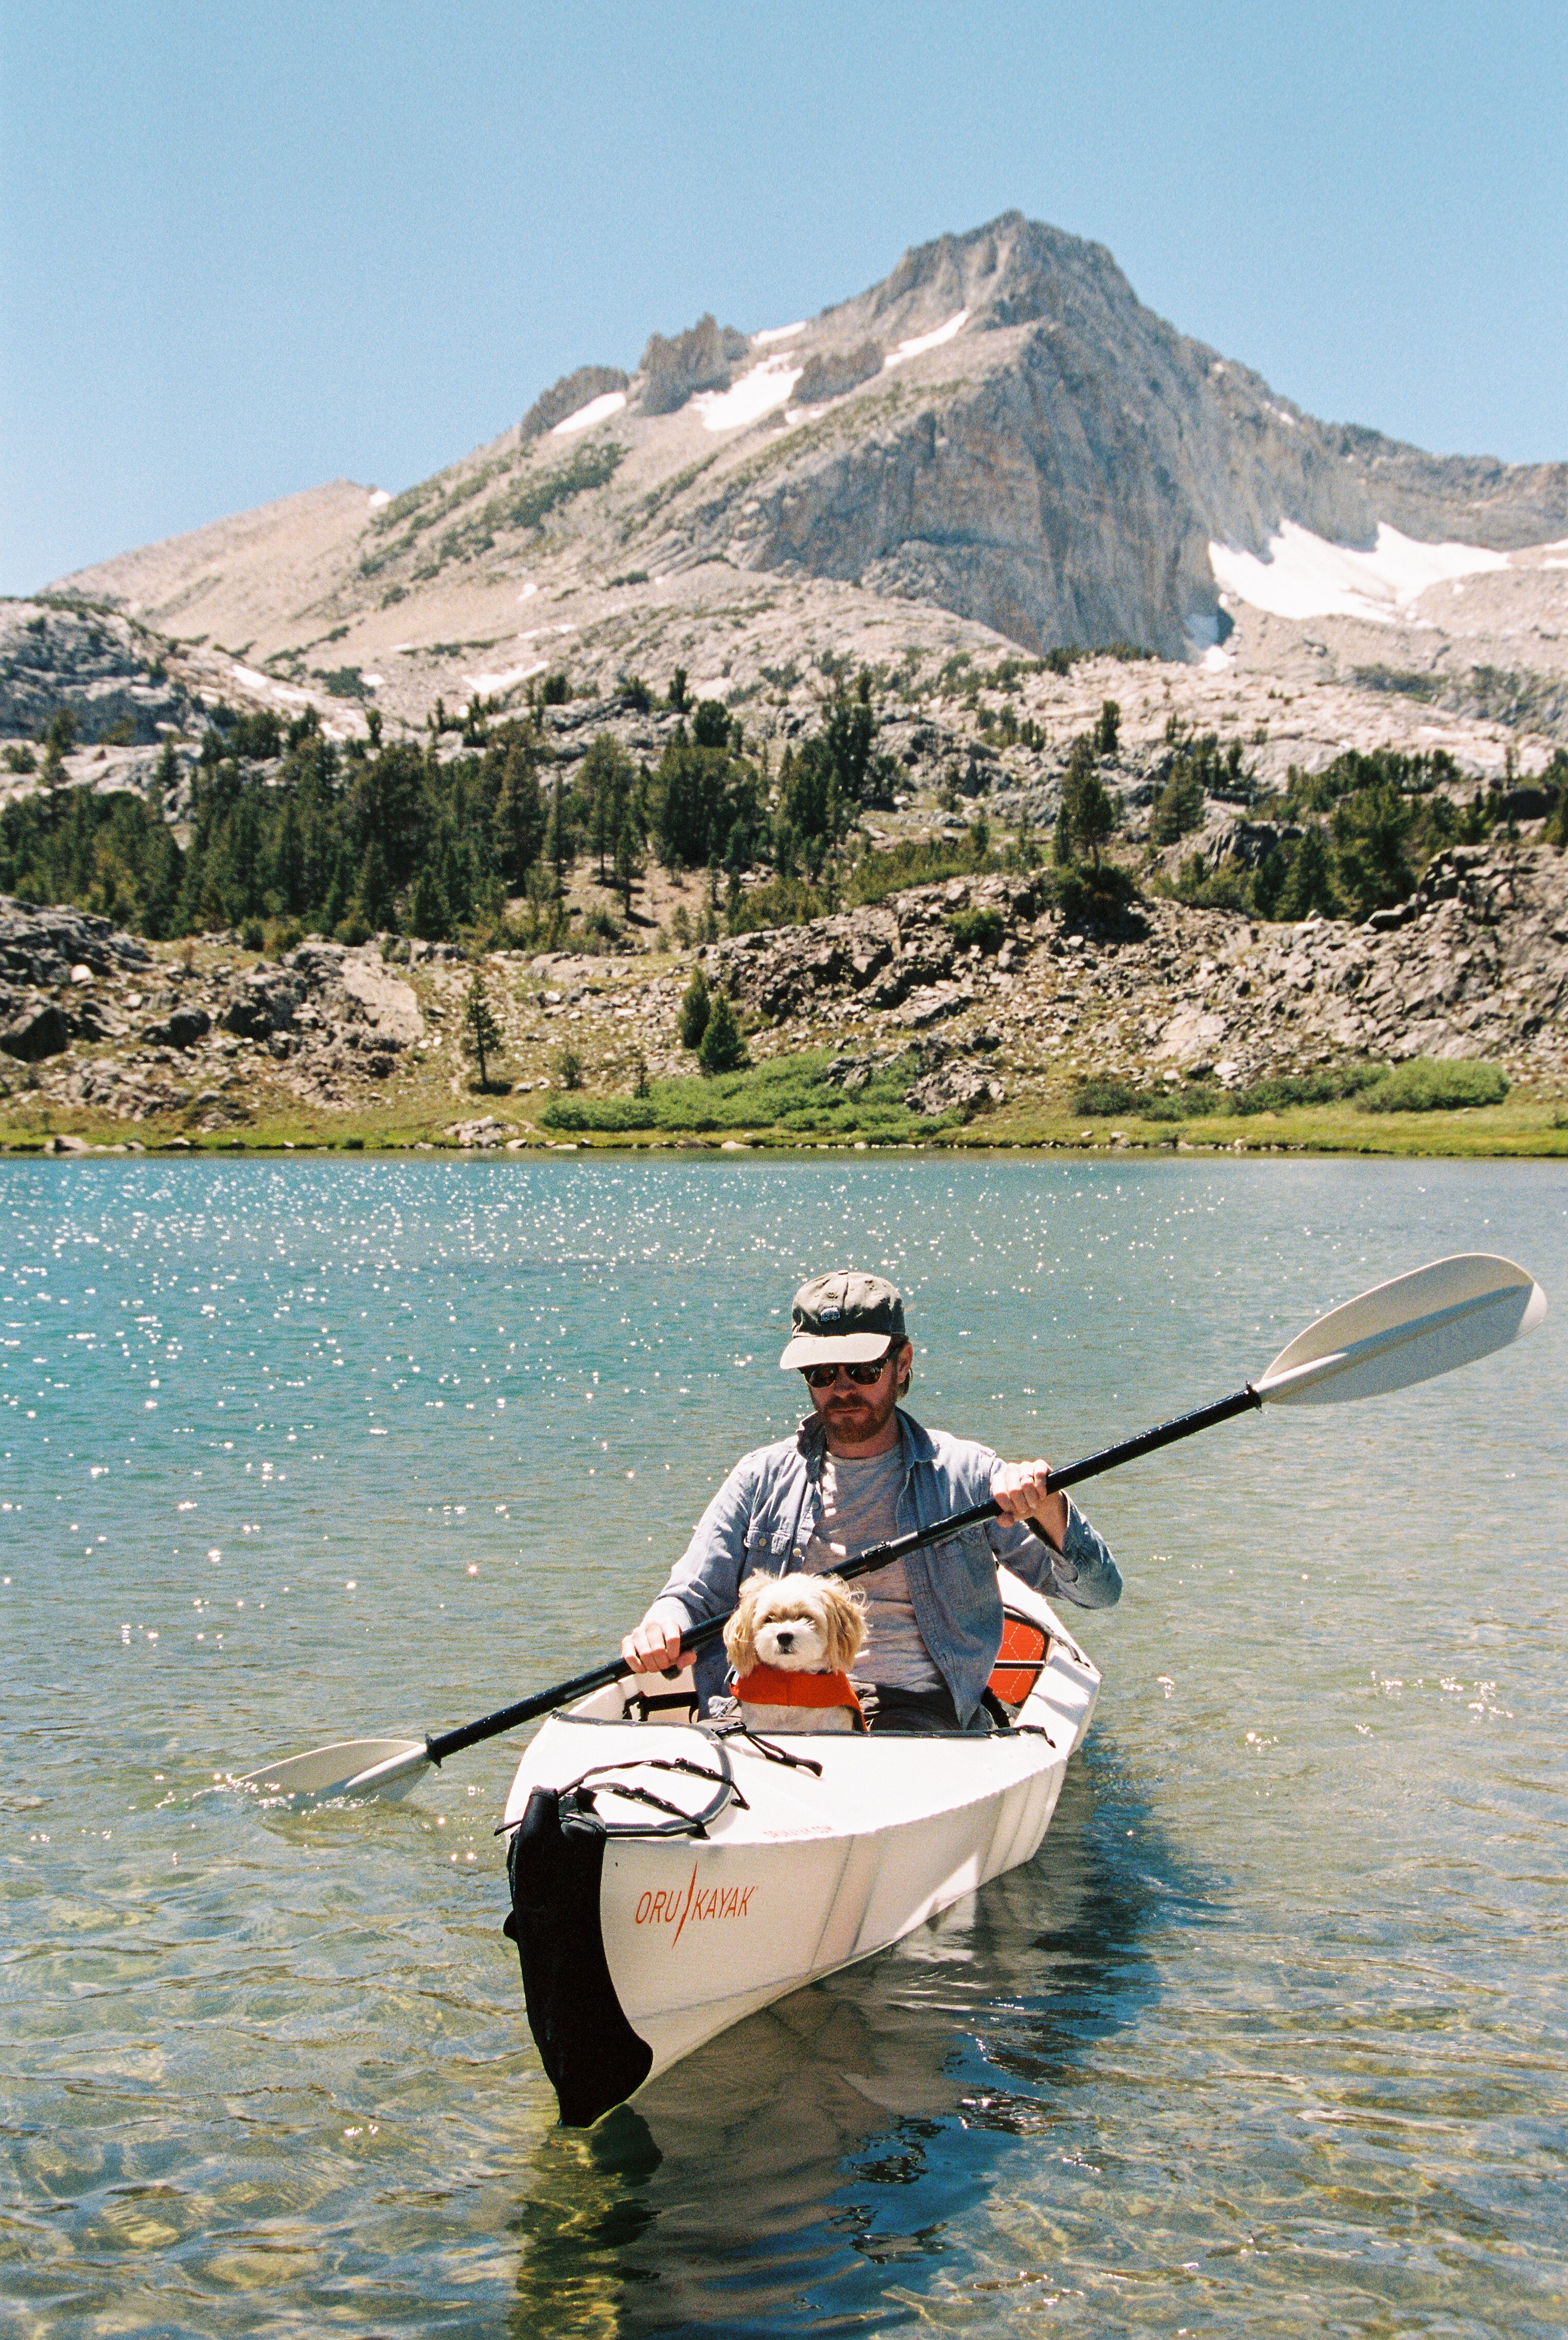 Small dog in a kayak with a guy on a lake with a mountain in the background